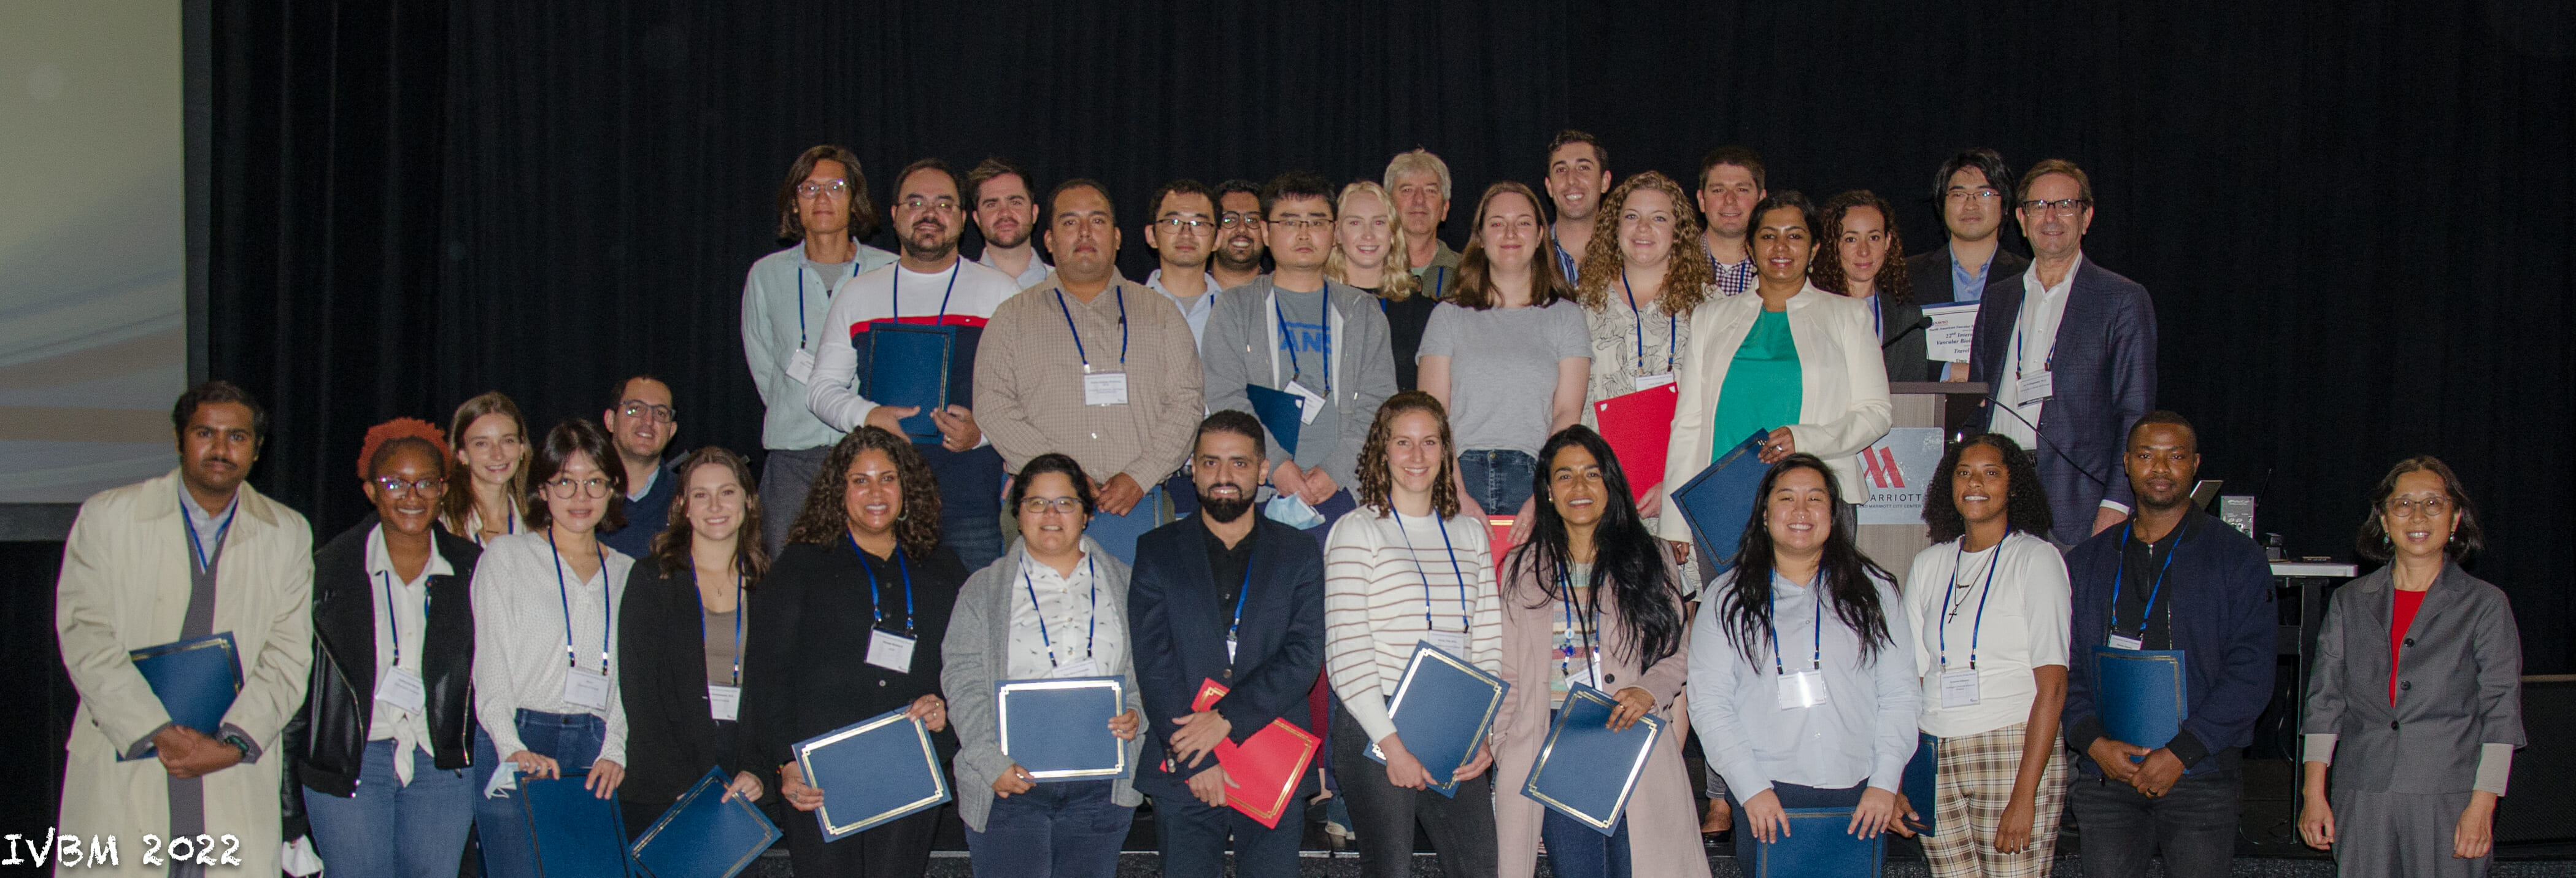 Recipients of the 2022 NAVBO Trainee Travel Awards to the IVBM